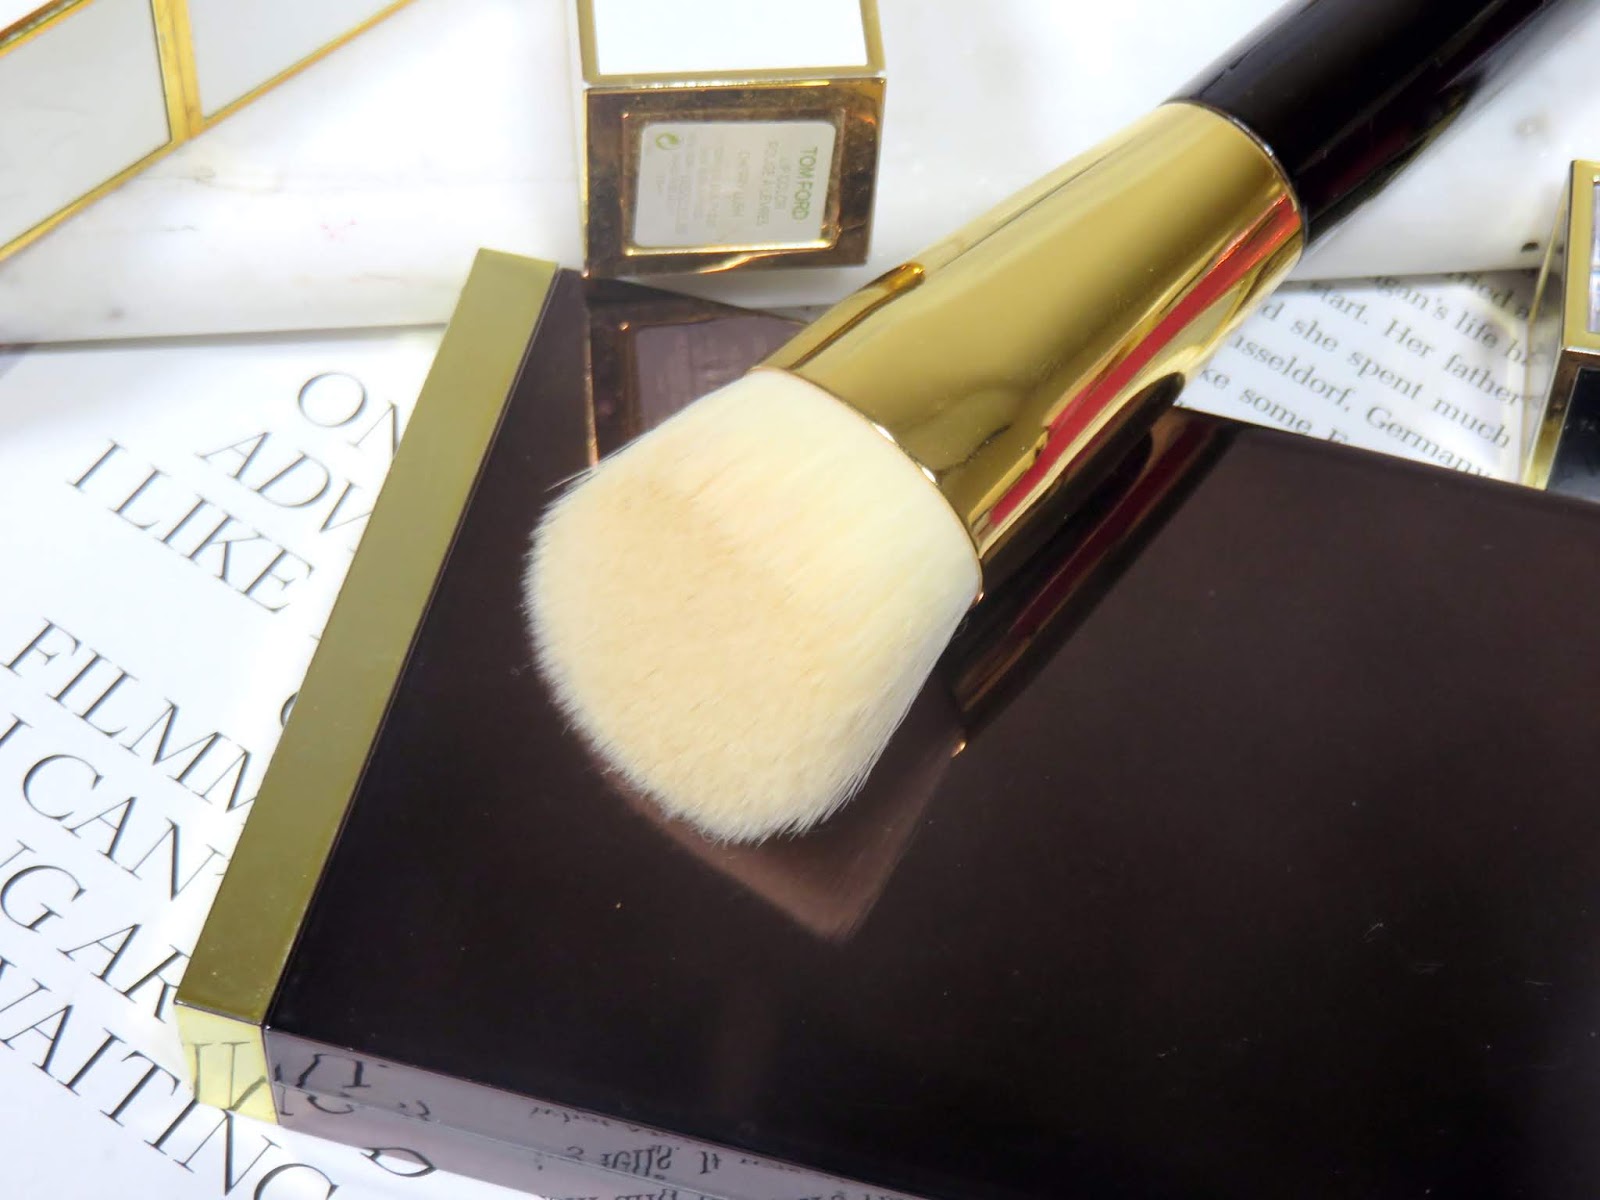 Tom Ford Shade and Illuminate Foundation Brush 2.5 Review